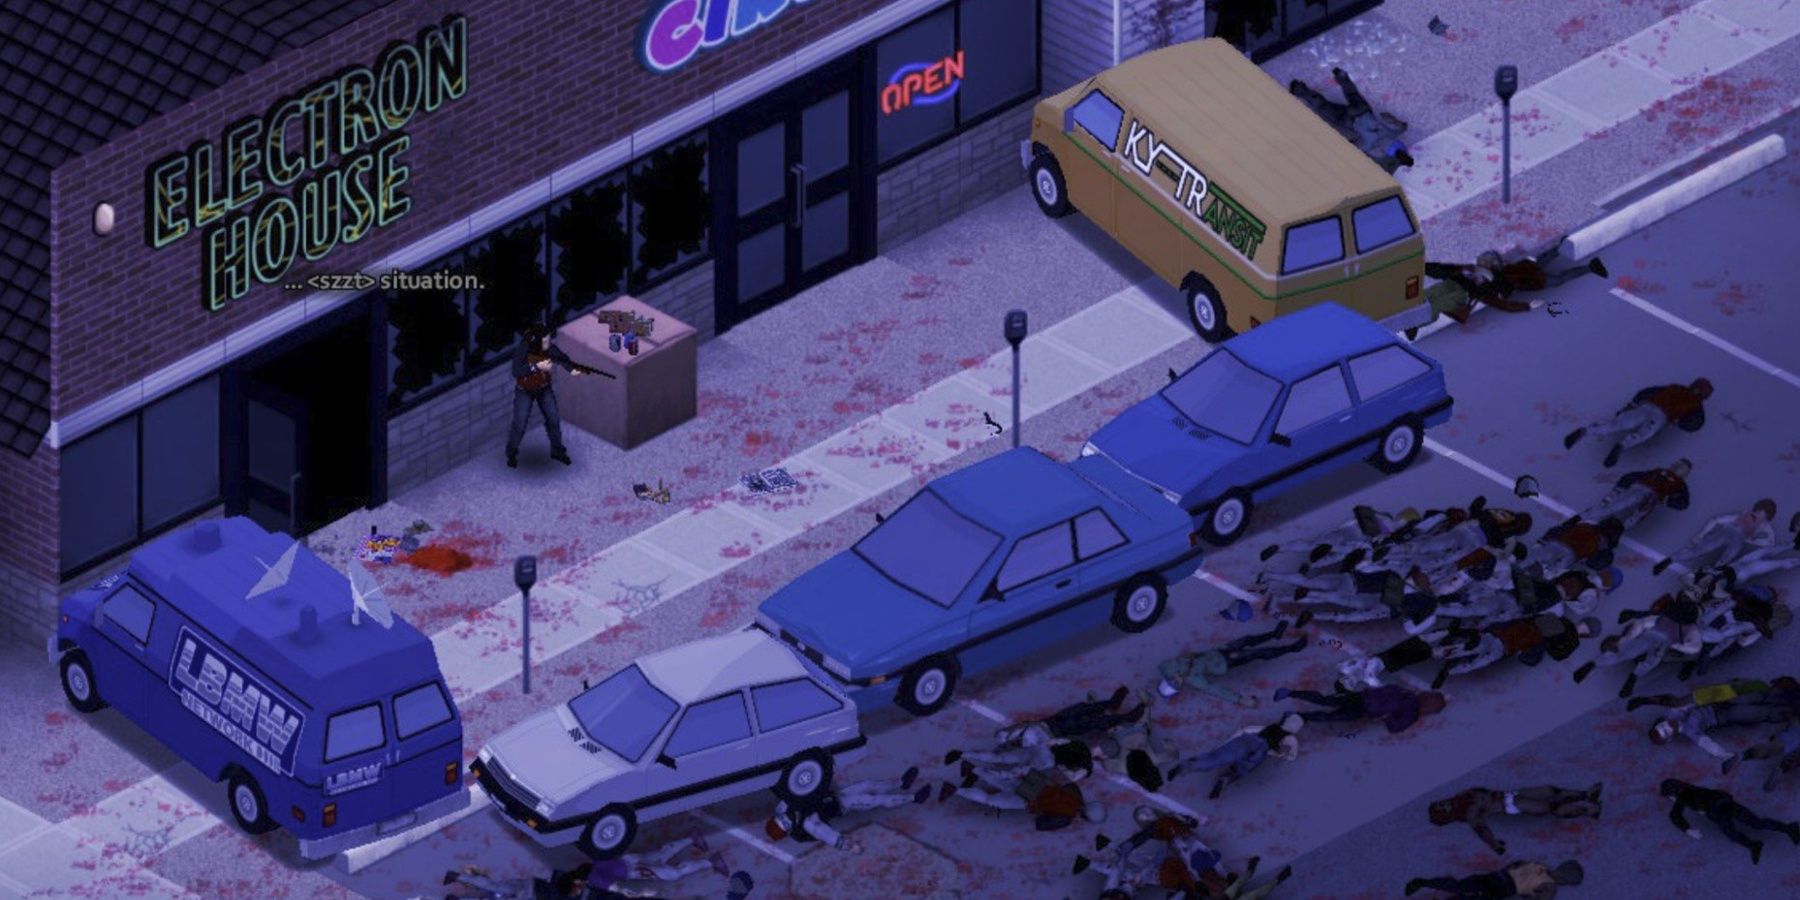 The player barricaded behind cars and dead zombies lying on the other side